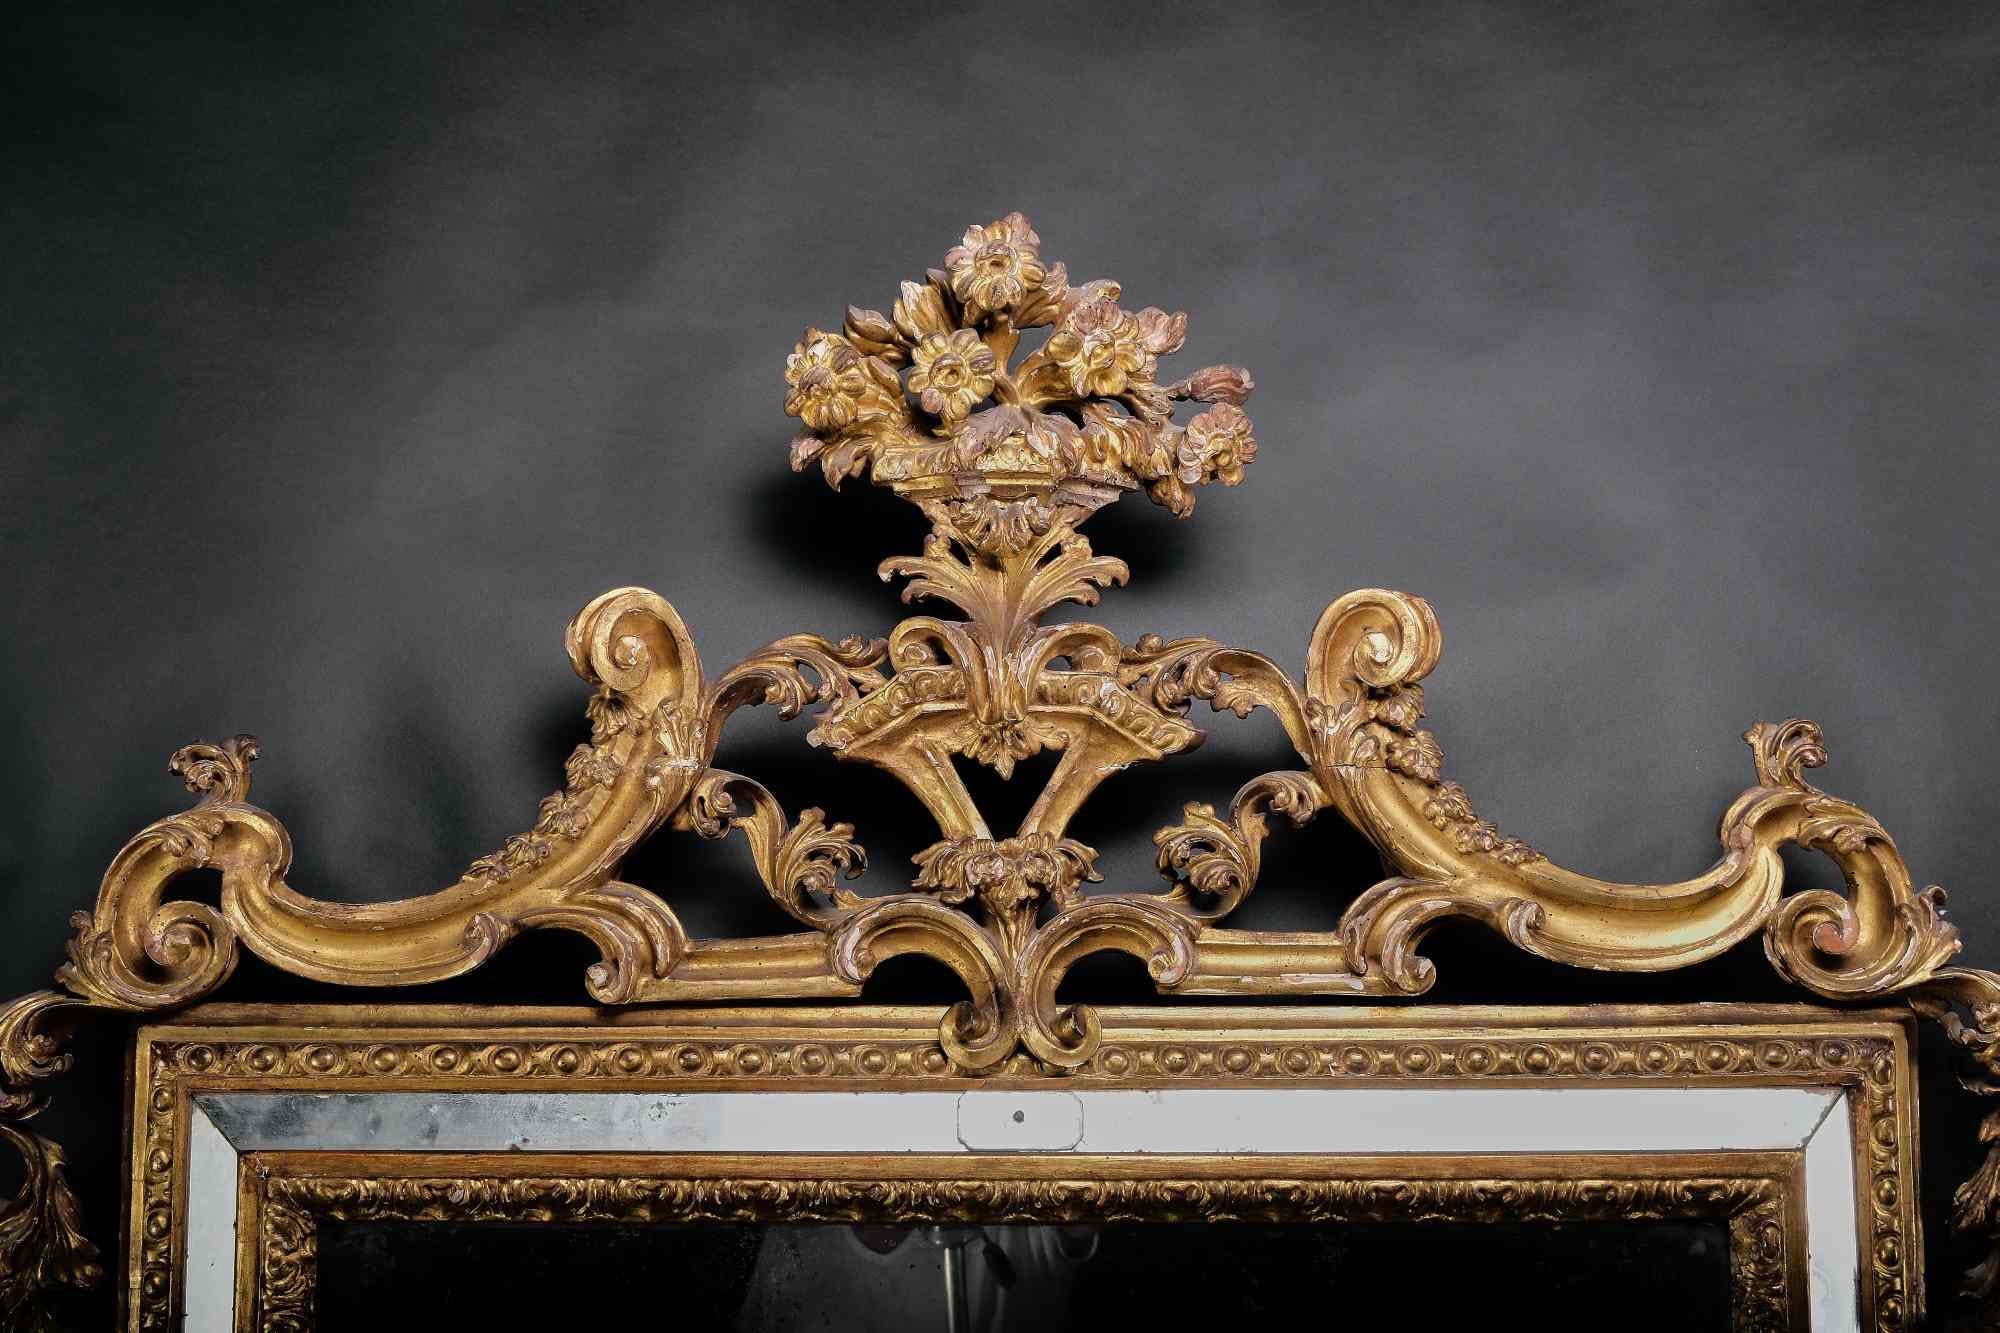 The streamlined frame adorned with an acanthus frieze is covered with mirrors and decorated with decorative engravings all around. The beautifully openwork pediment is surmounted by a cup of flowers. The sides are decorated with garlands of flowers,